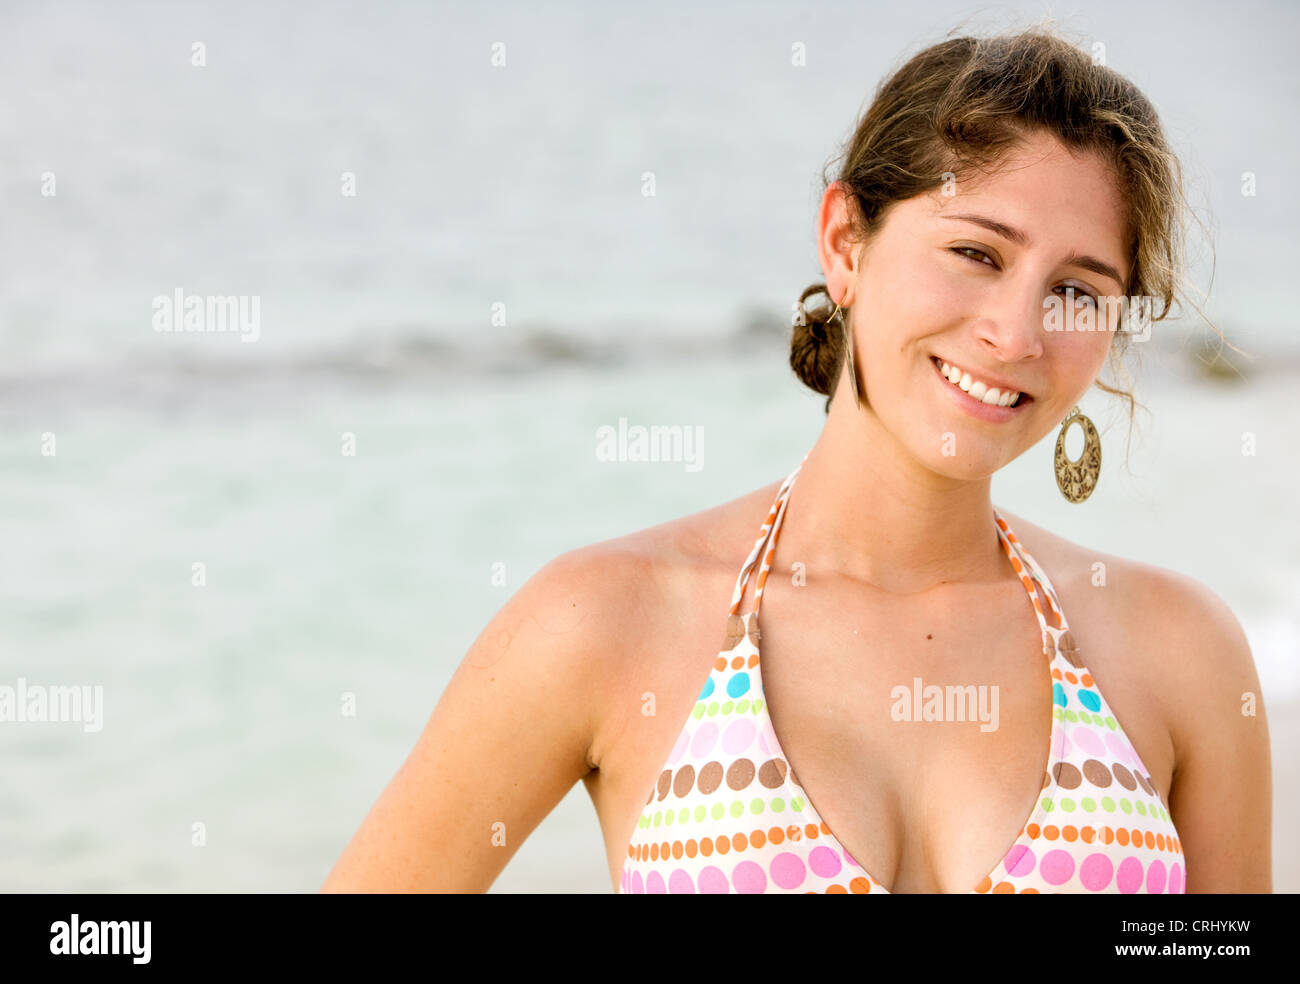 Beautiful woman with sexy face looks at camera. Stock Photo by valuavitaly